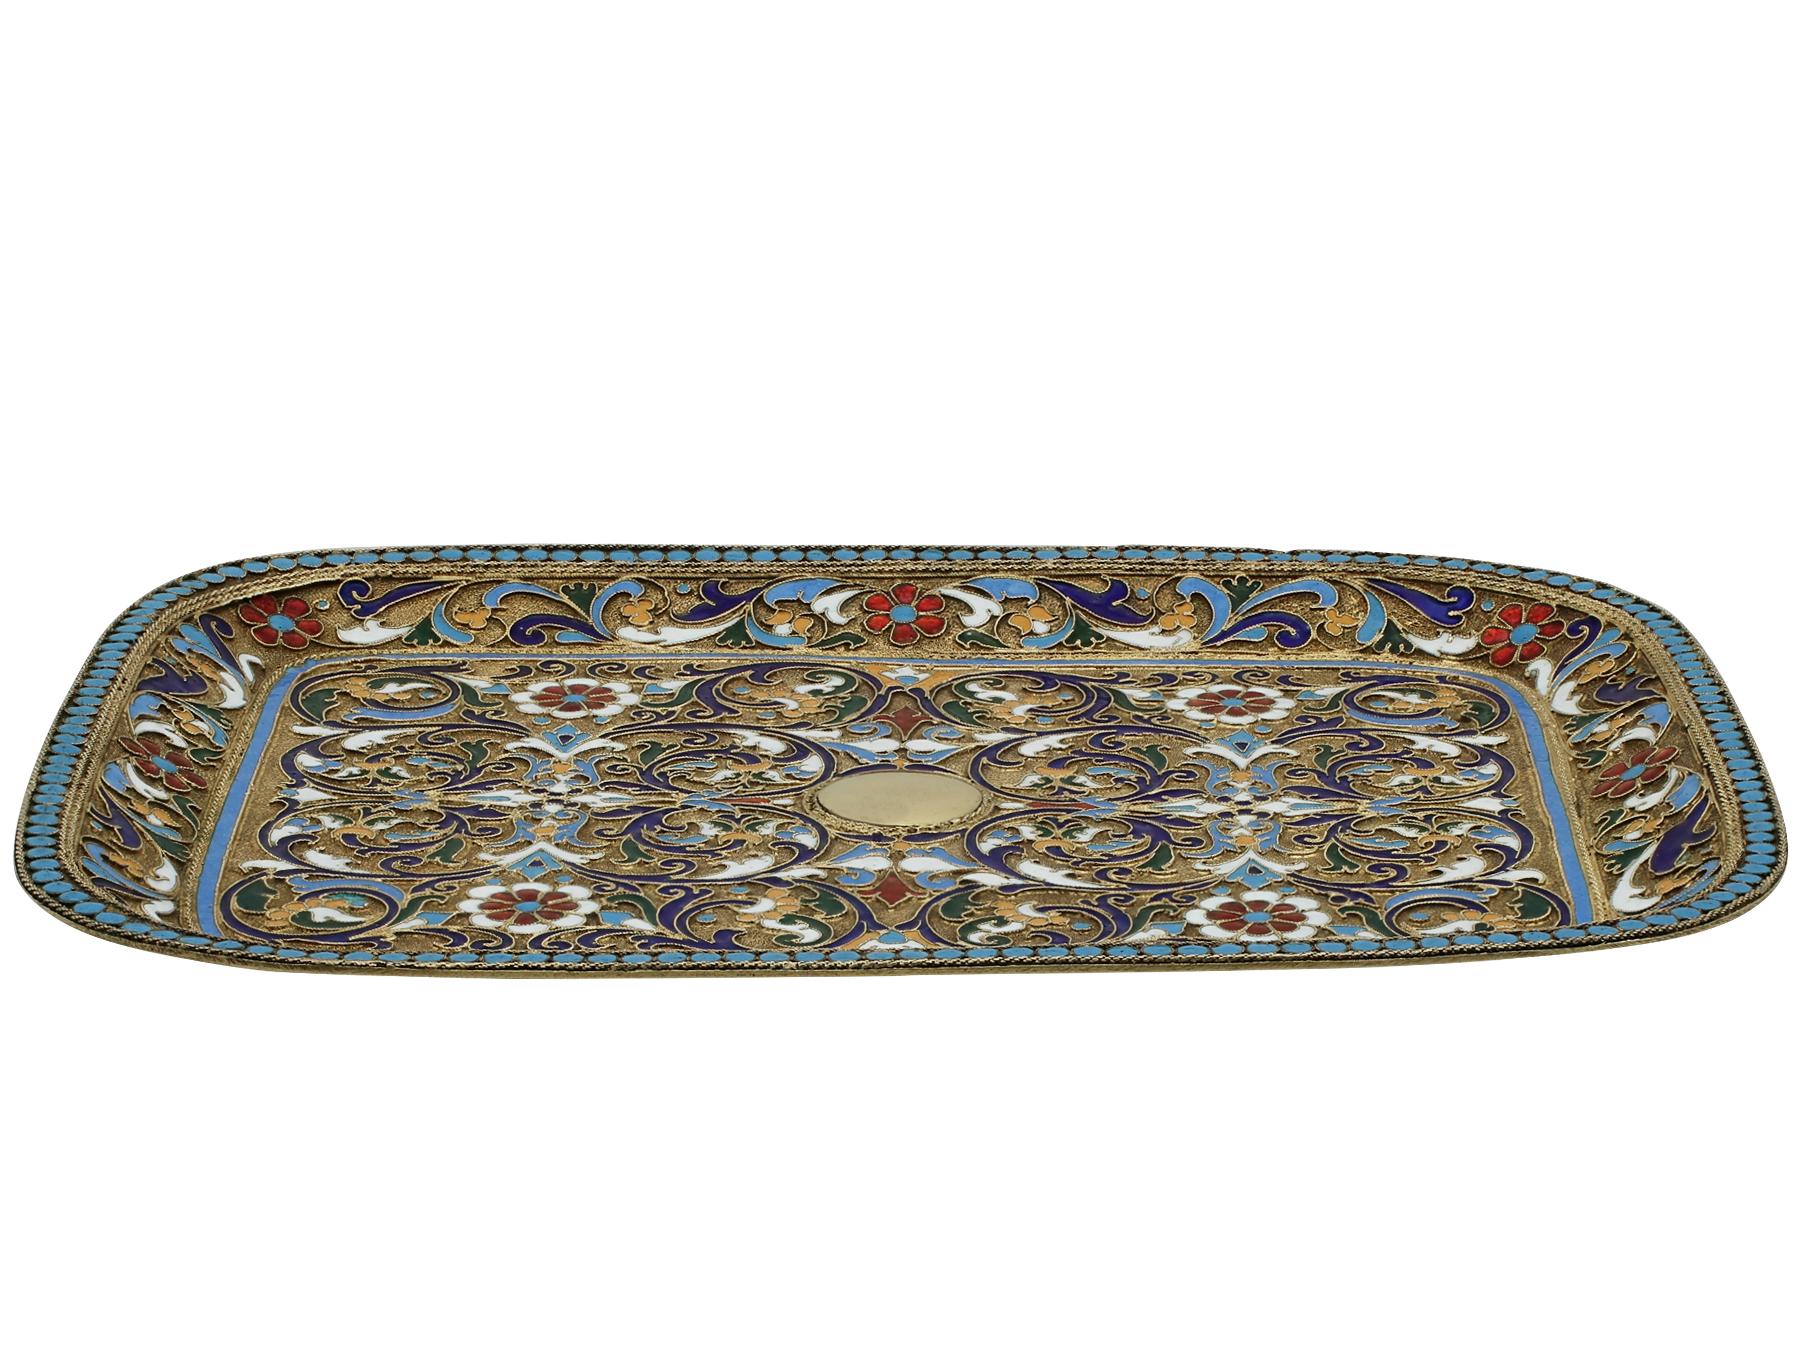 An exceptional, fine and impressive antique Russian silver and polychrome cloisonne enamel tray; an addition to our diverse silver teaware collection.

This exceptional antique Russian silver and enamel tray has a rectangular rounded form.

The